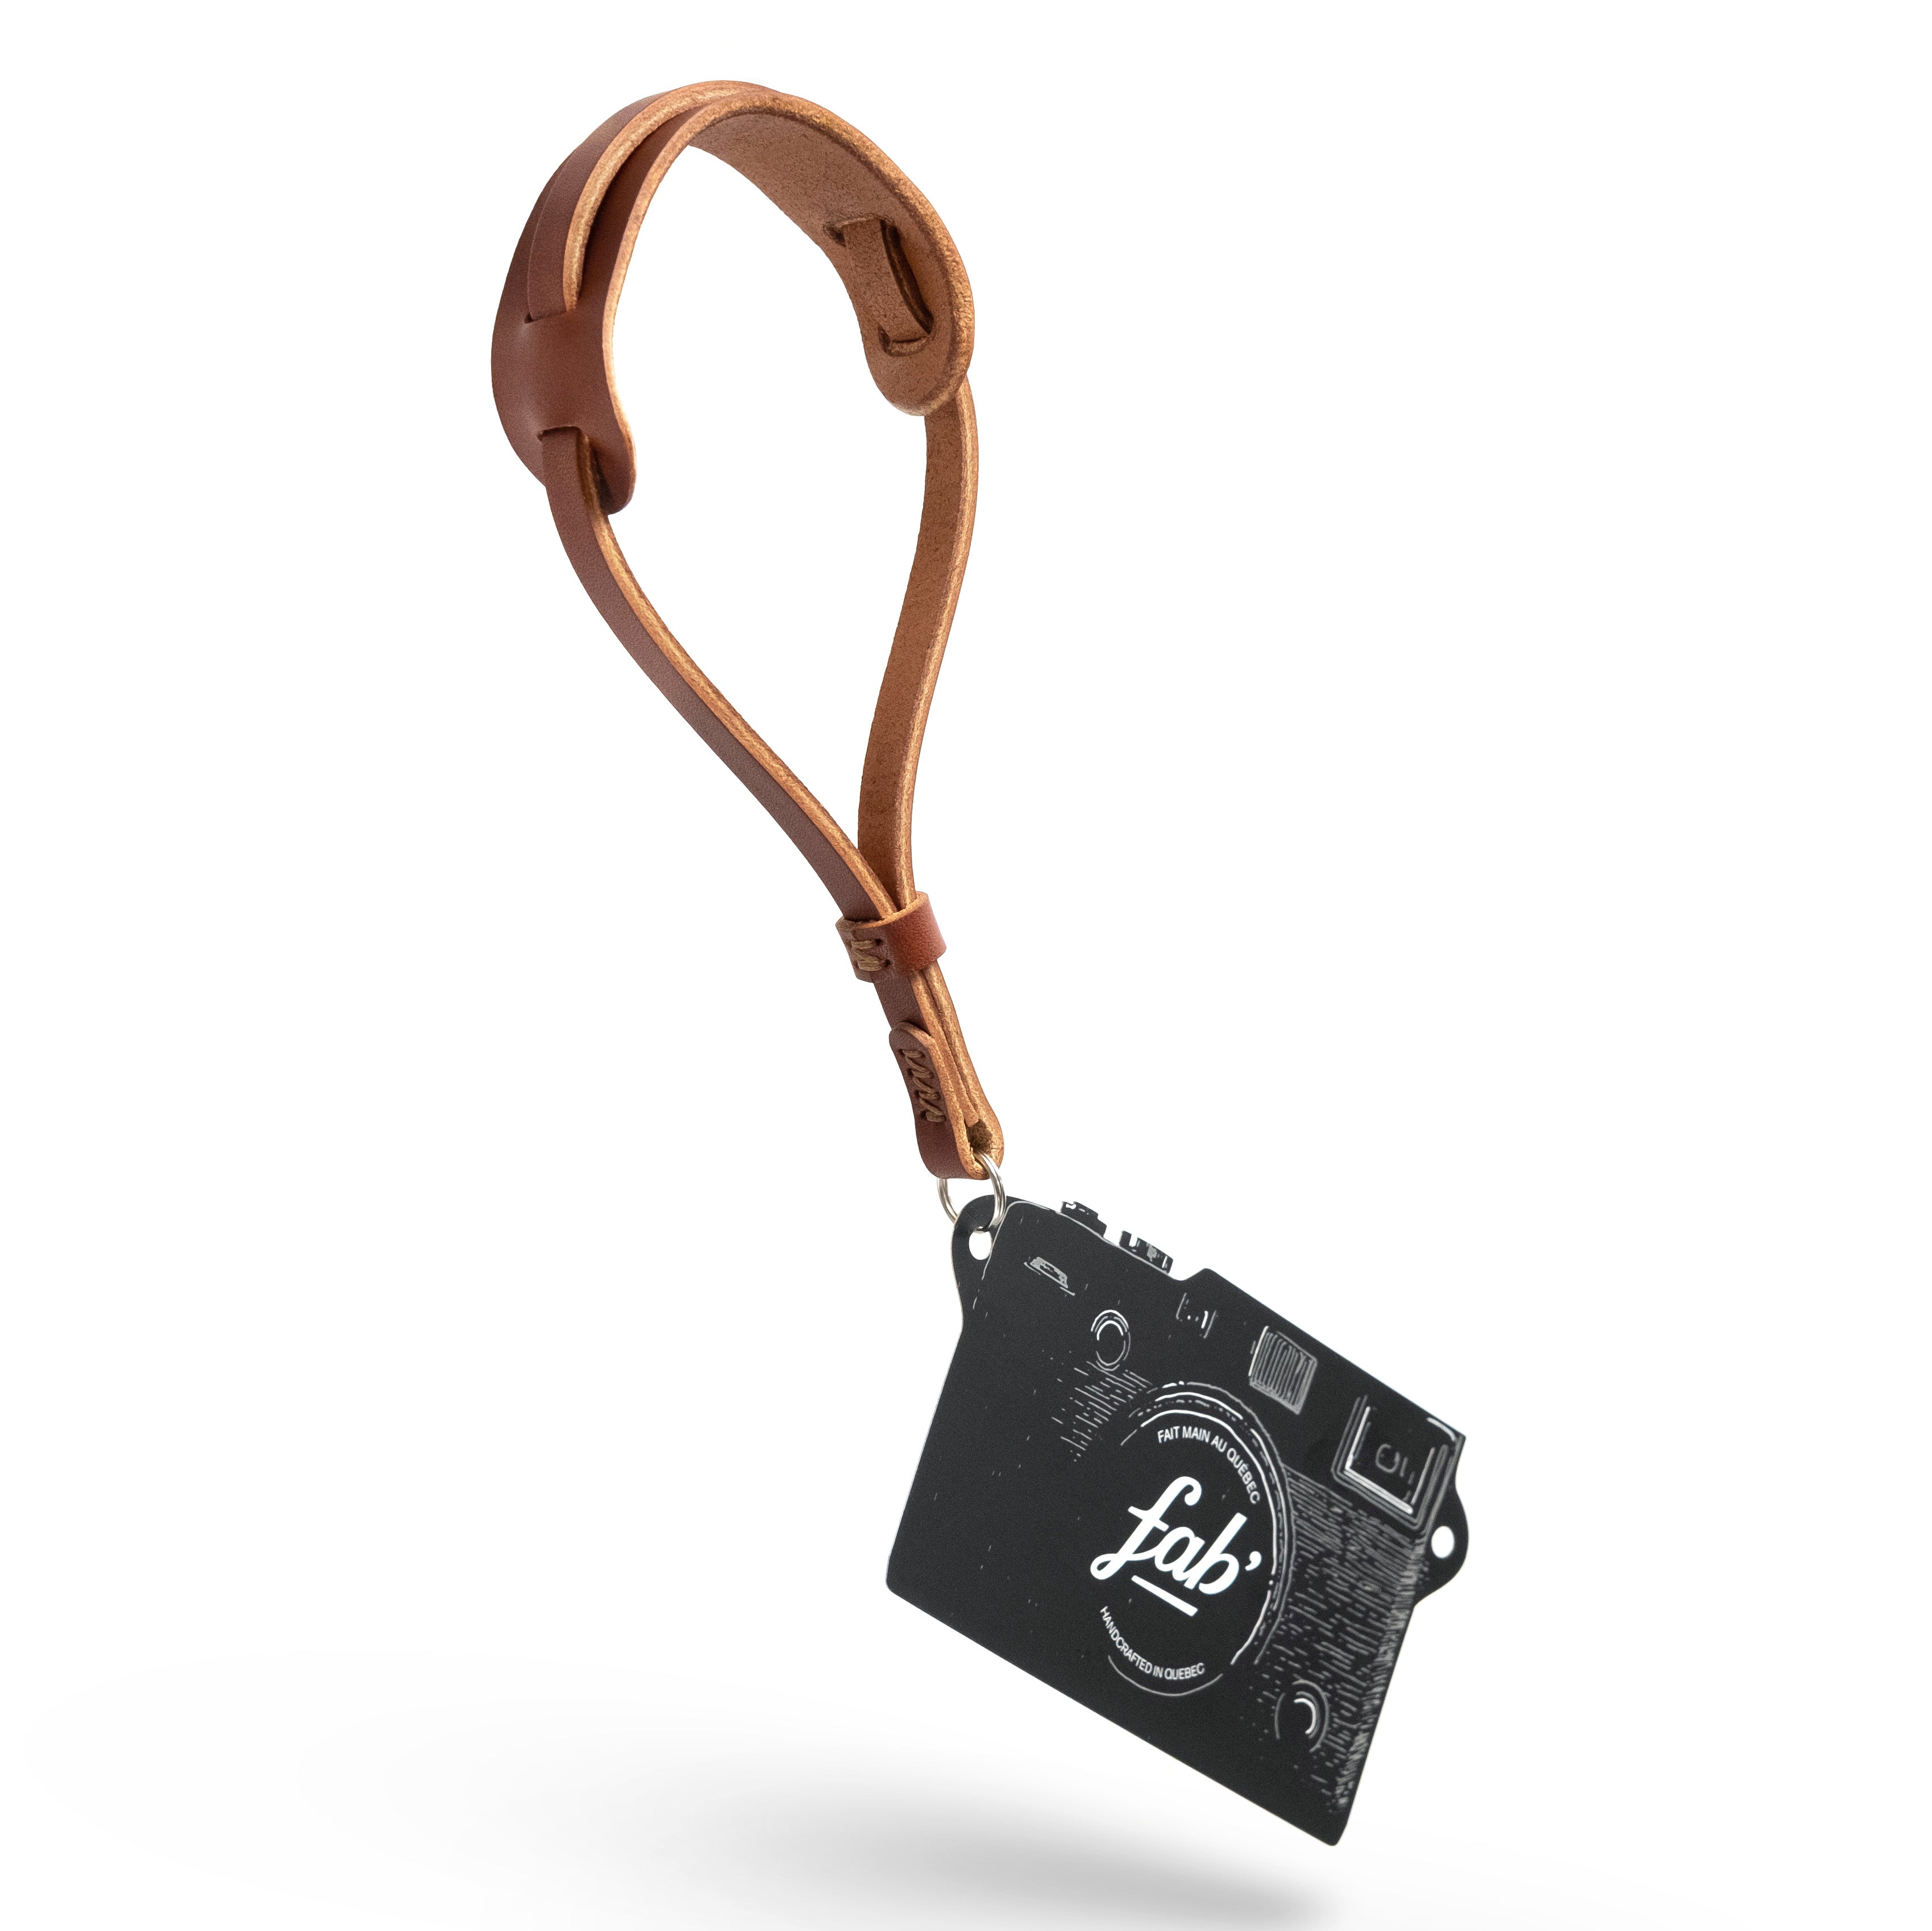 Fab' F2.8 Leather Wrist Strap With Pad